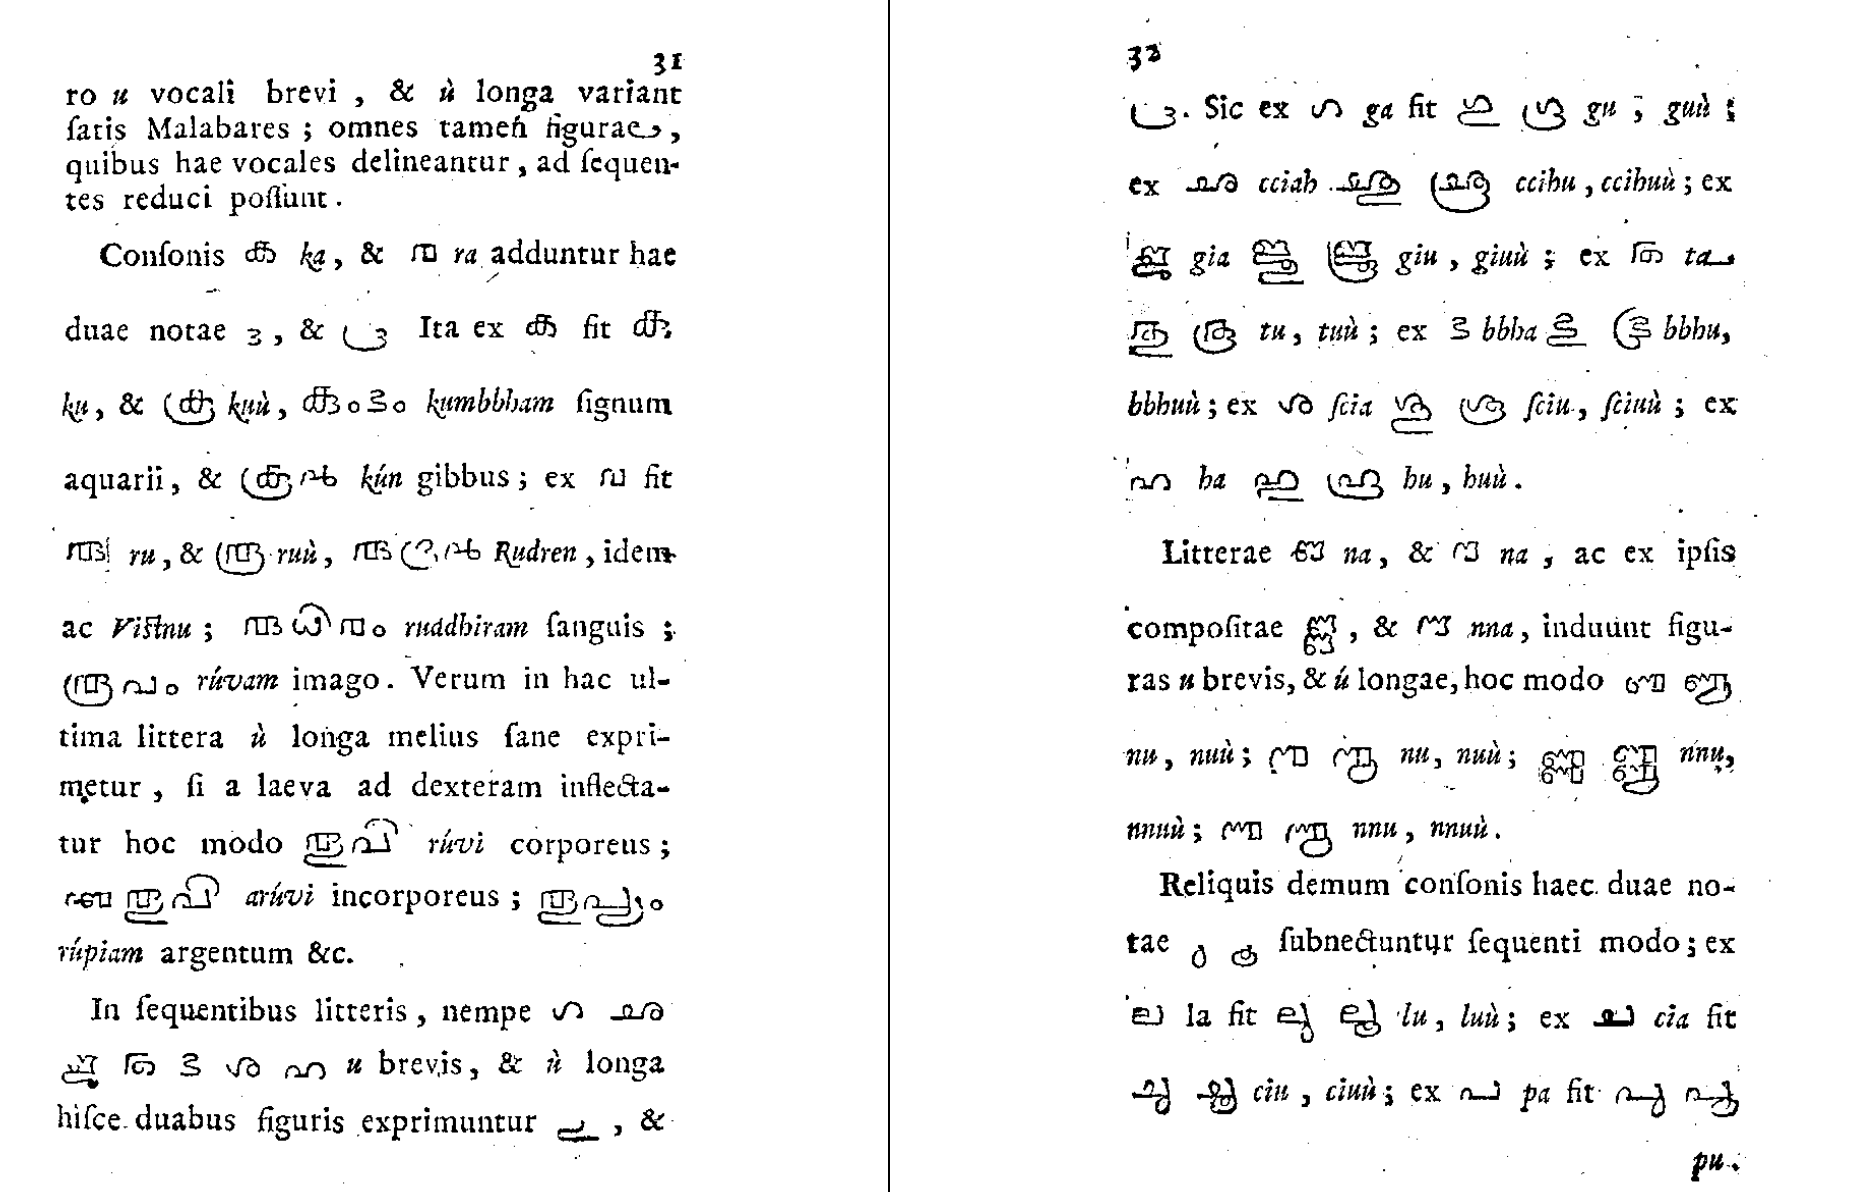 Excerpt from Alphabetum grandonico-malabaricum sive samscrudonicum describing the usage of u and uː signs. Relevant details from the book is explained in the post.